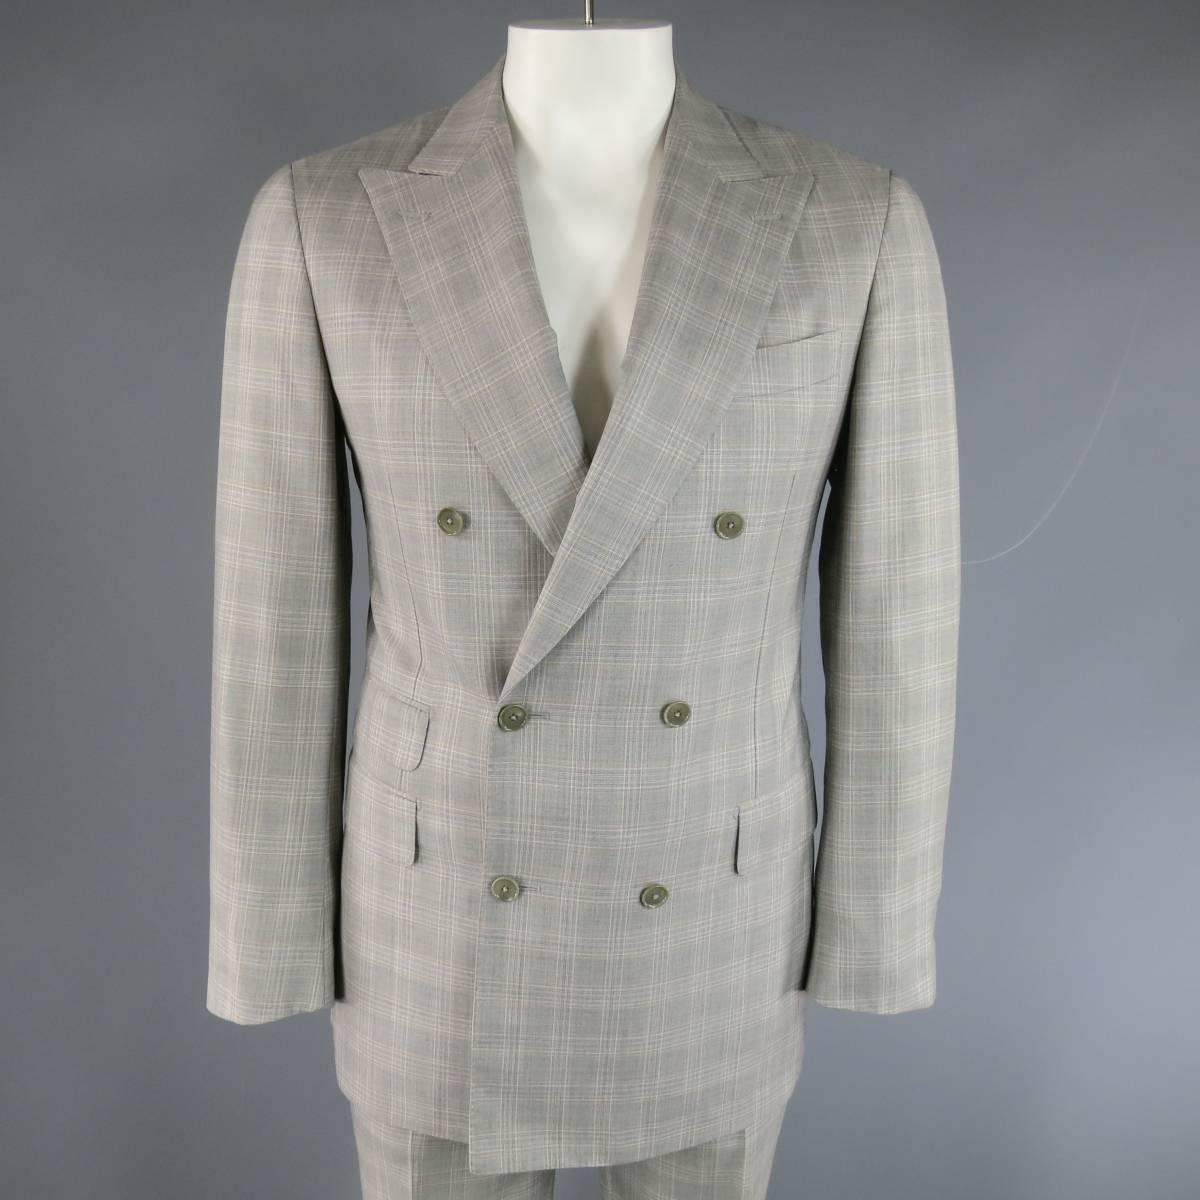 Classic Pal Zileri two piece suit in a light gray wool silk blend with all over white and beige plaid print includes a double breasted, peak lapel sport coat with functional button cuffs and double vented back and matching flat front, cuffed hem